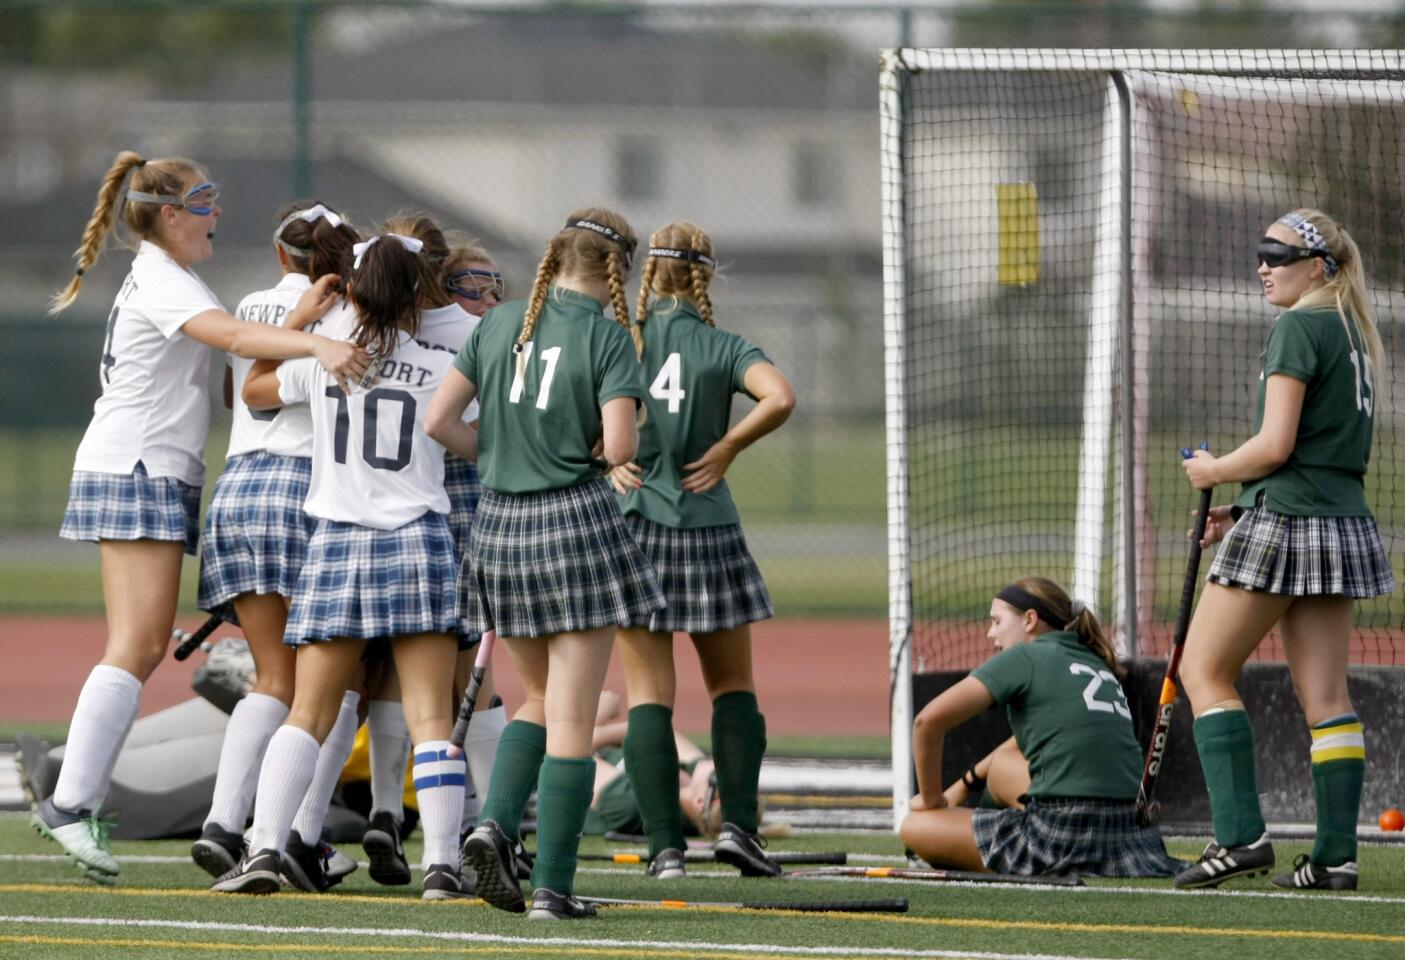 Newport Harbor High School players celebrate an over-time goal that gave them the Tournament of Champions championship in field hockey title game vs. Edison High School, at Westminster High School in Westminster on Saturday, October 29, 2016. NHHS scored at 1:21 into the 10-minute overtime period.